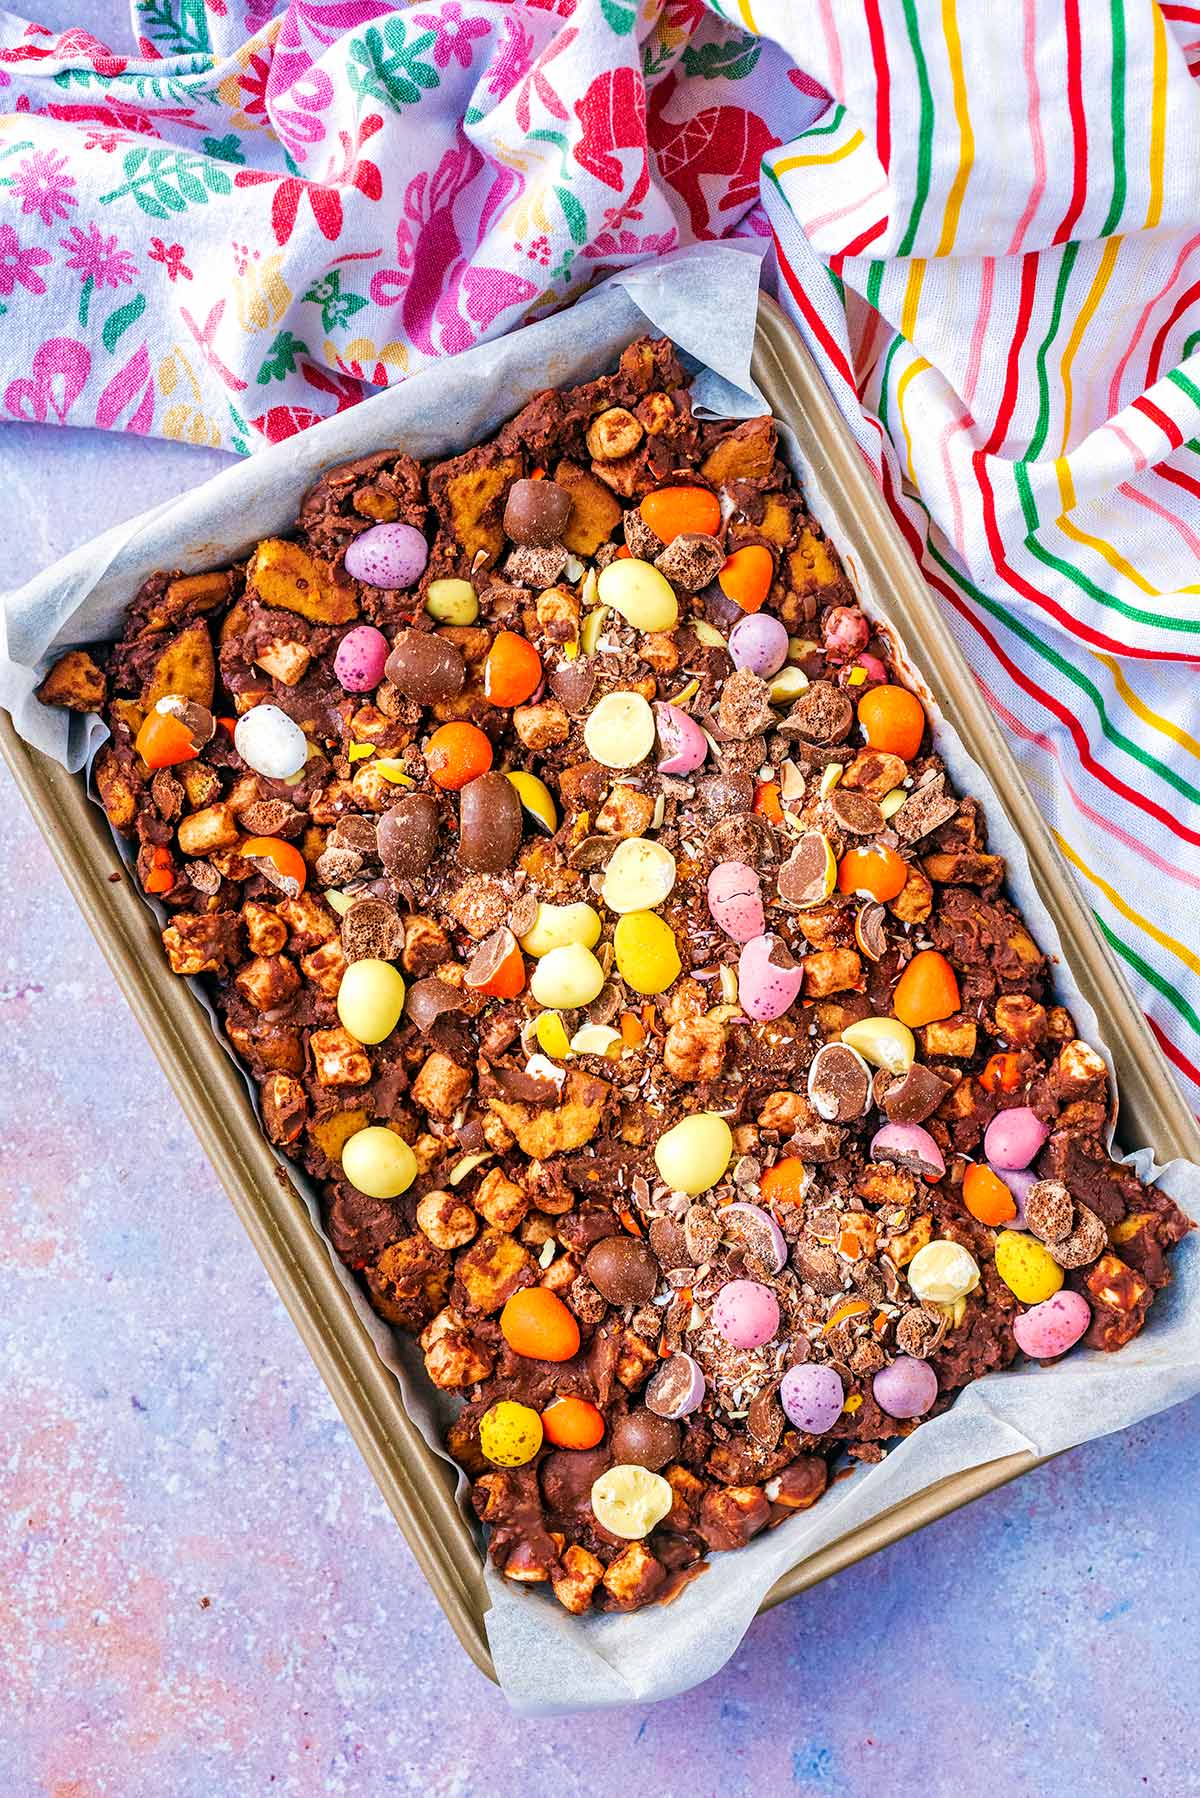 A baking tray containing rocky road.